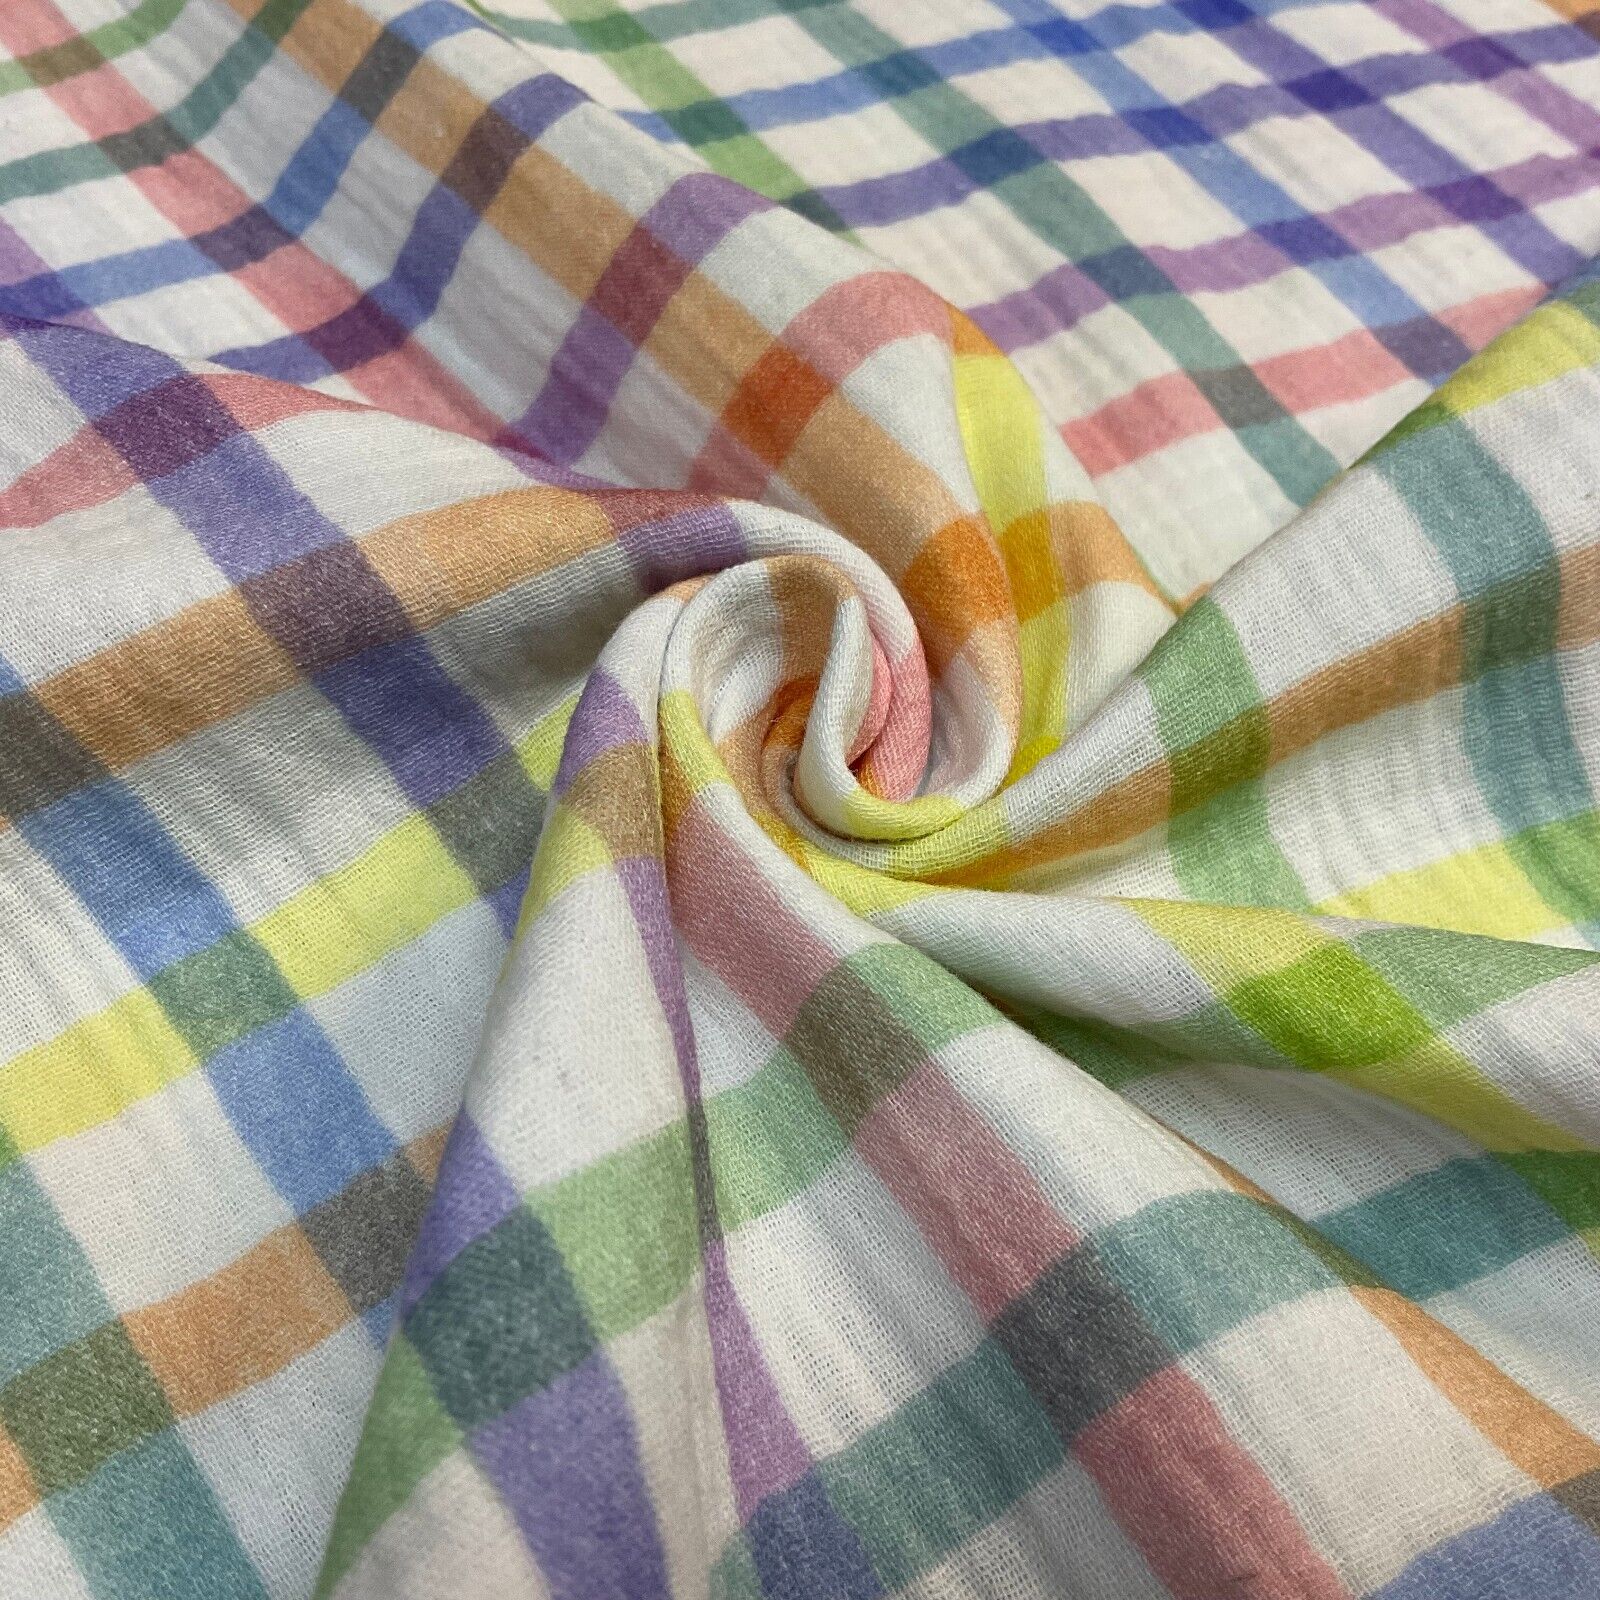 Printed Double gauze Fabric ideal for shirts, blouses Sold per Metre M1832